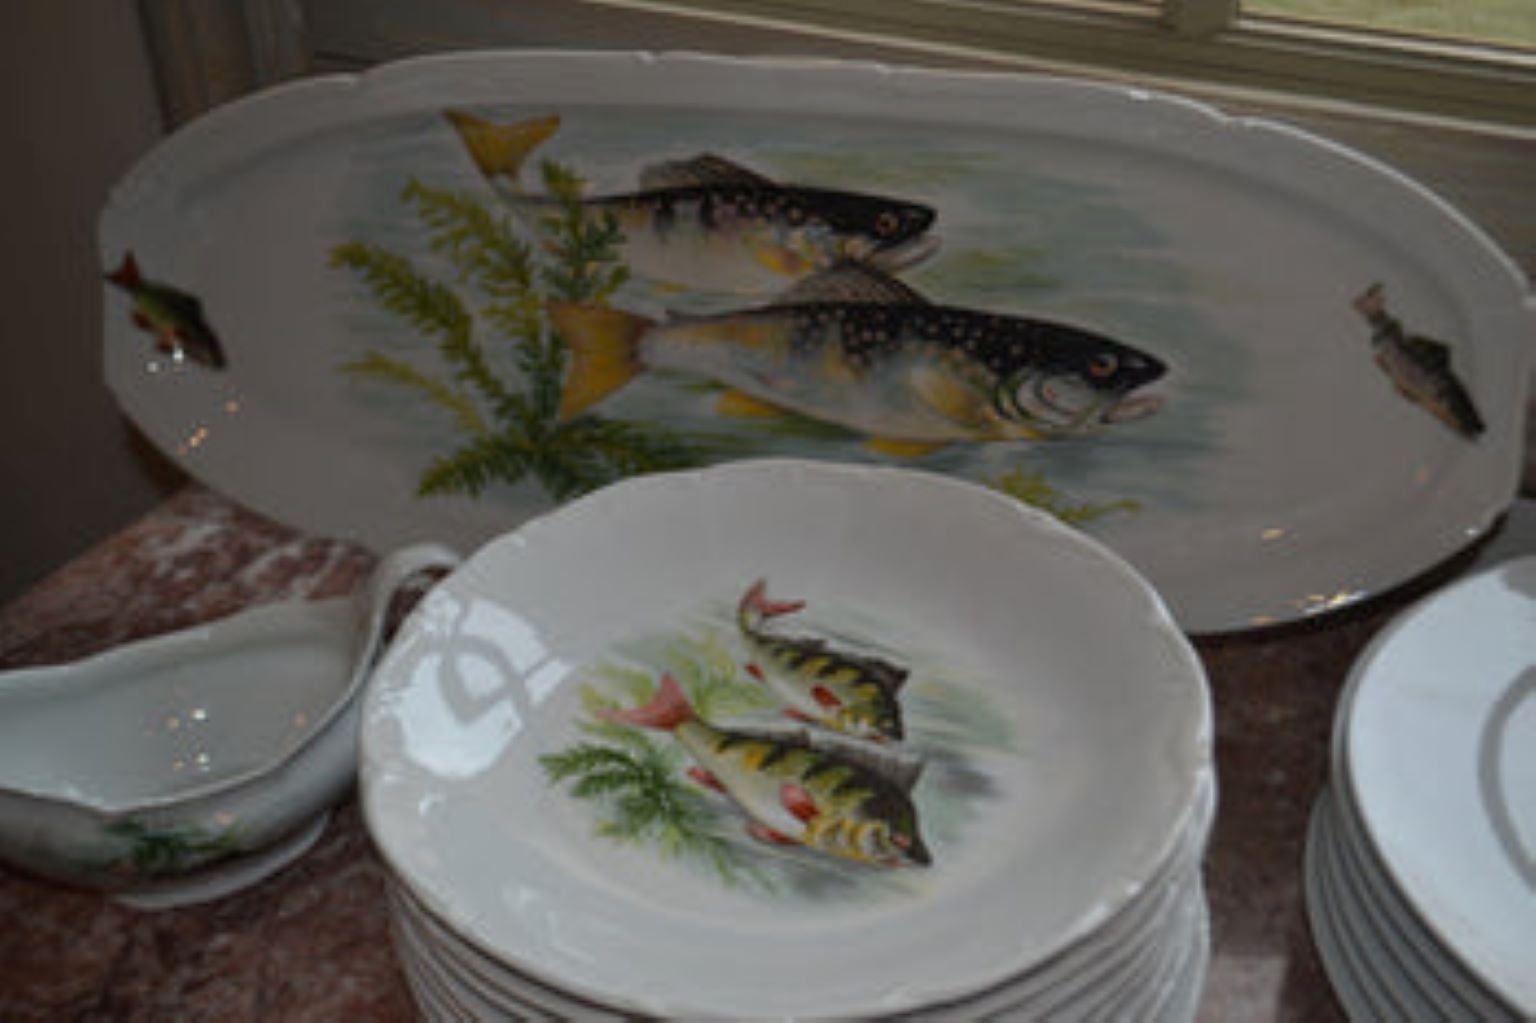 20 Piece French Porcelain fish set. 20th century, consisting of a fourteen piece set by Porcelaines de Sologne, comprised of 12 plates, and Oval platter and a sauce boat, together with 6 associated large plates by Porcelaine de Limoges, each with